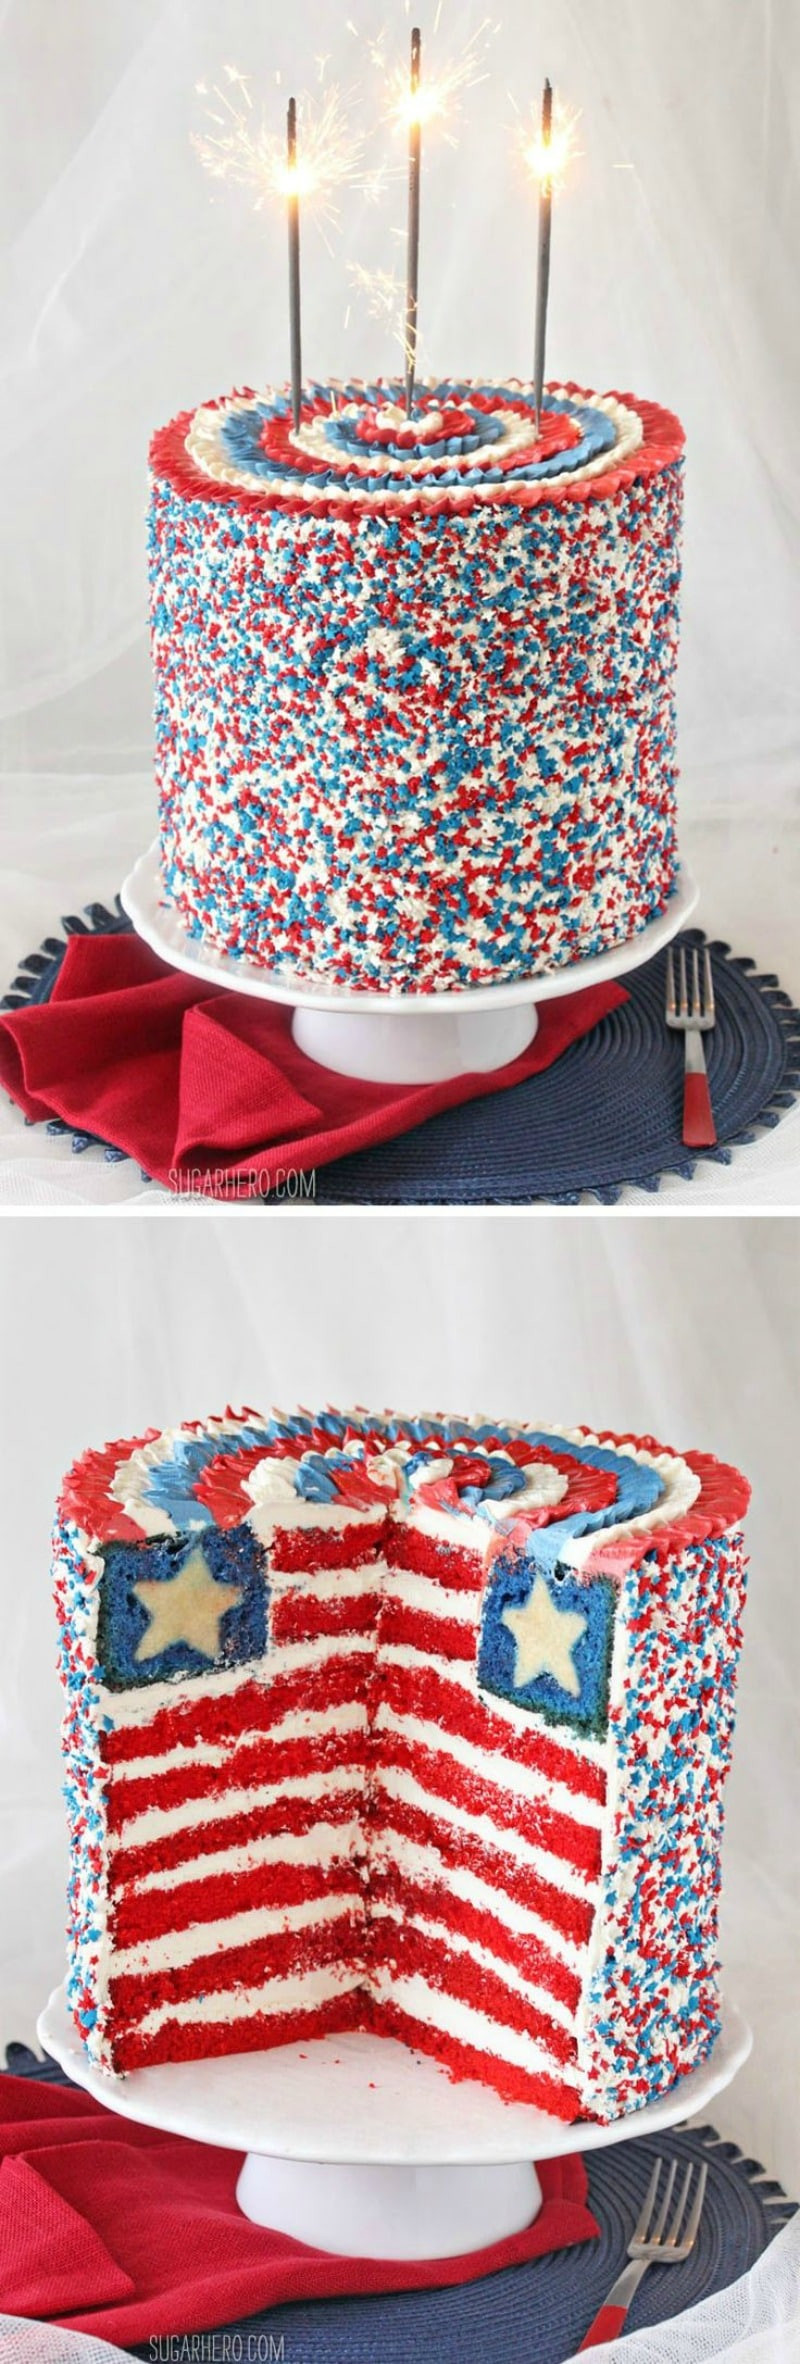 4Th Of July Cake Recipes
 11 Genius 4th of July Cakes – Sugar Geek Show